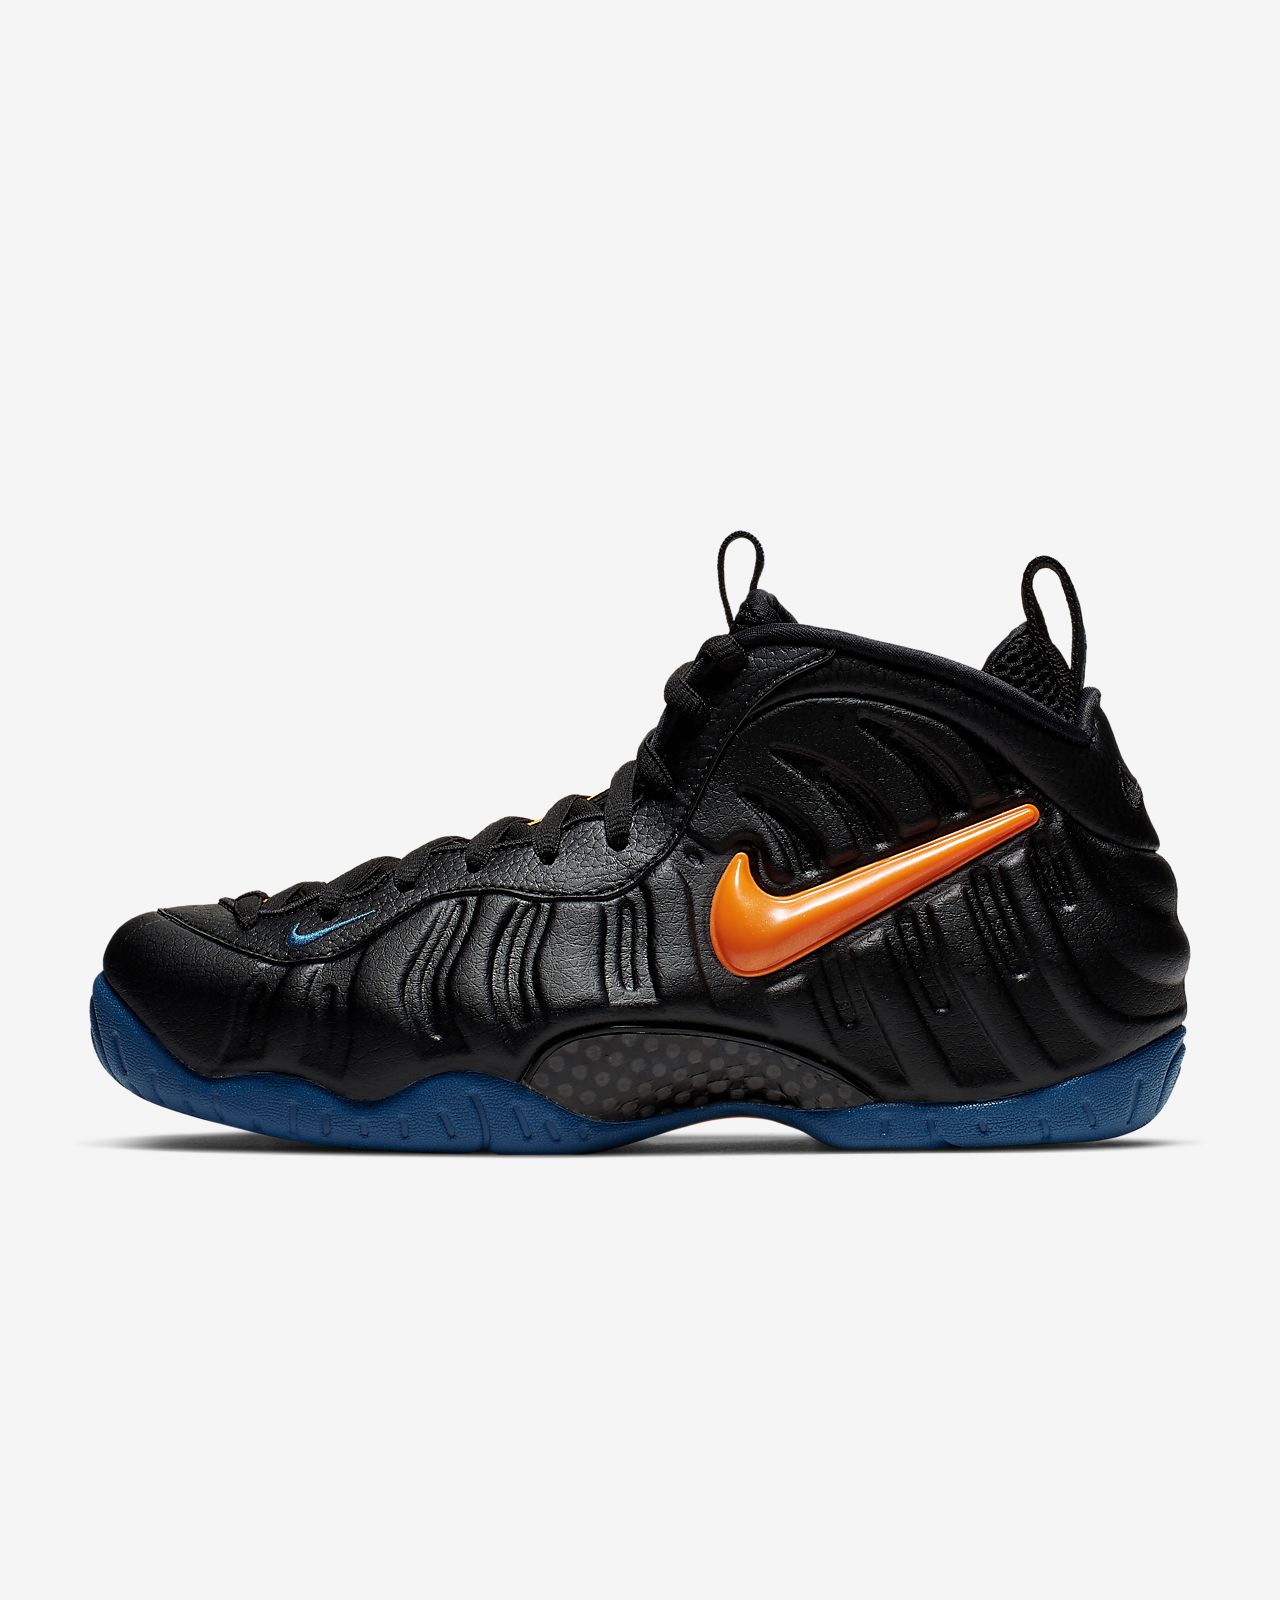 How Do You Like The Nike WMNS Air Foamposite One